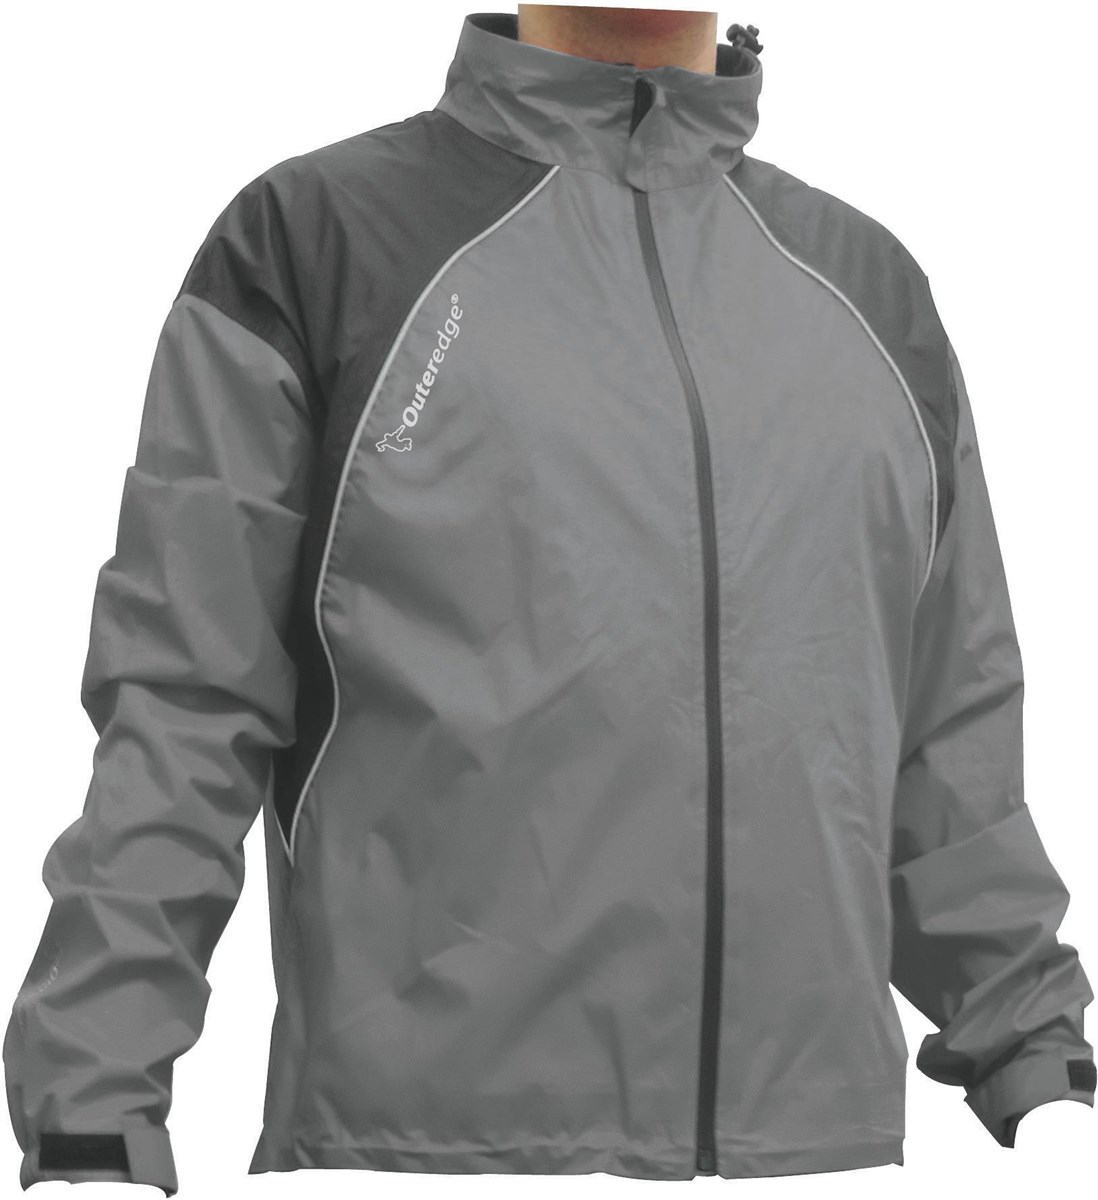 Outeredge Sports Waterproof Cycling Jacket product image